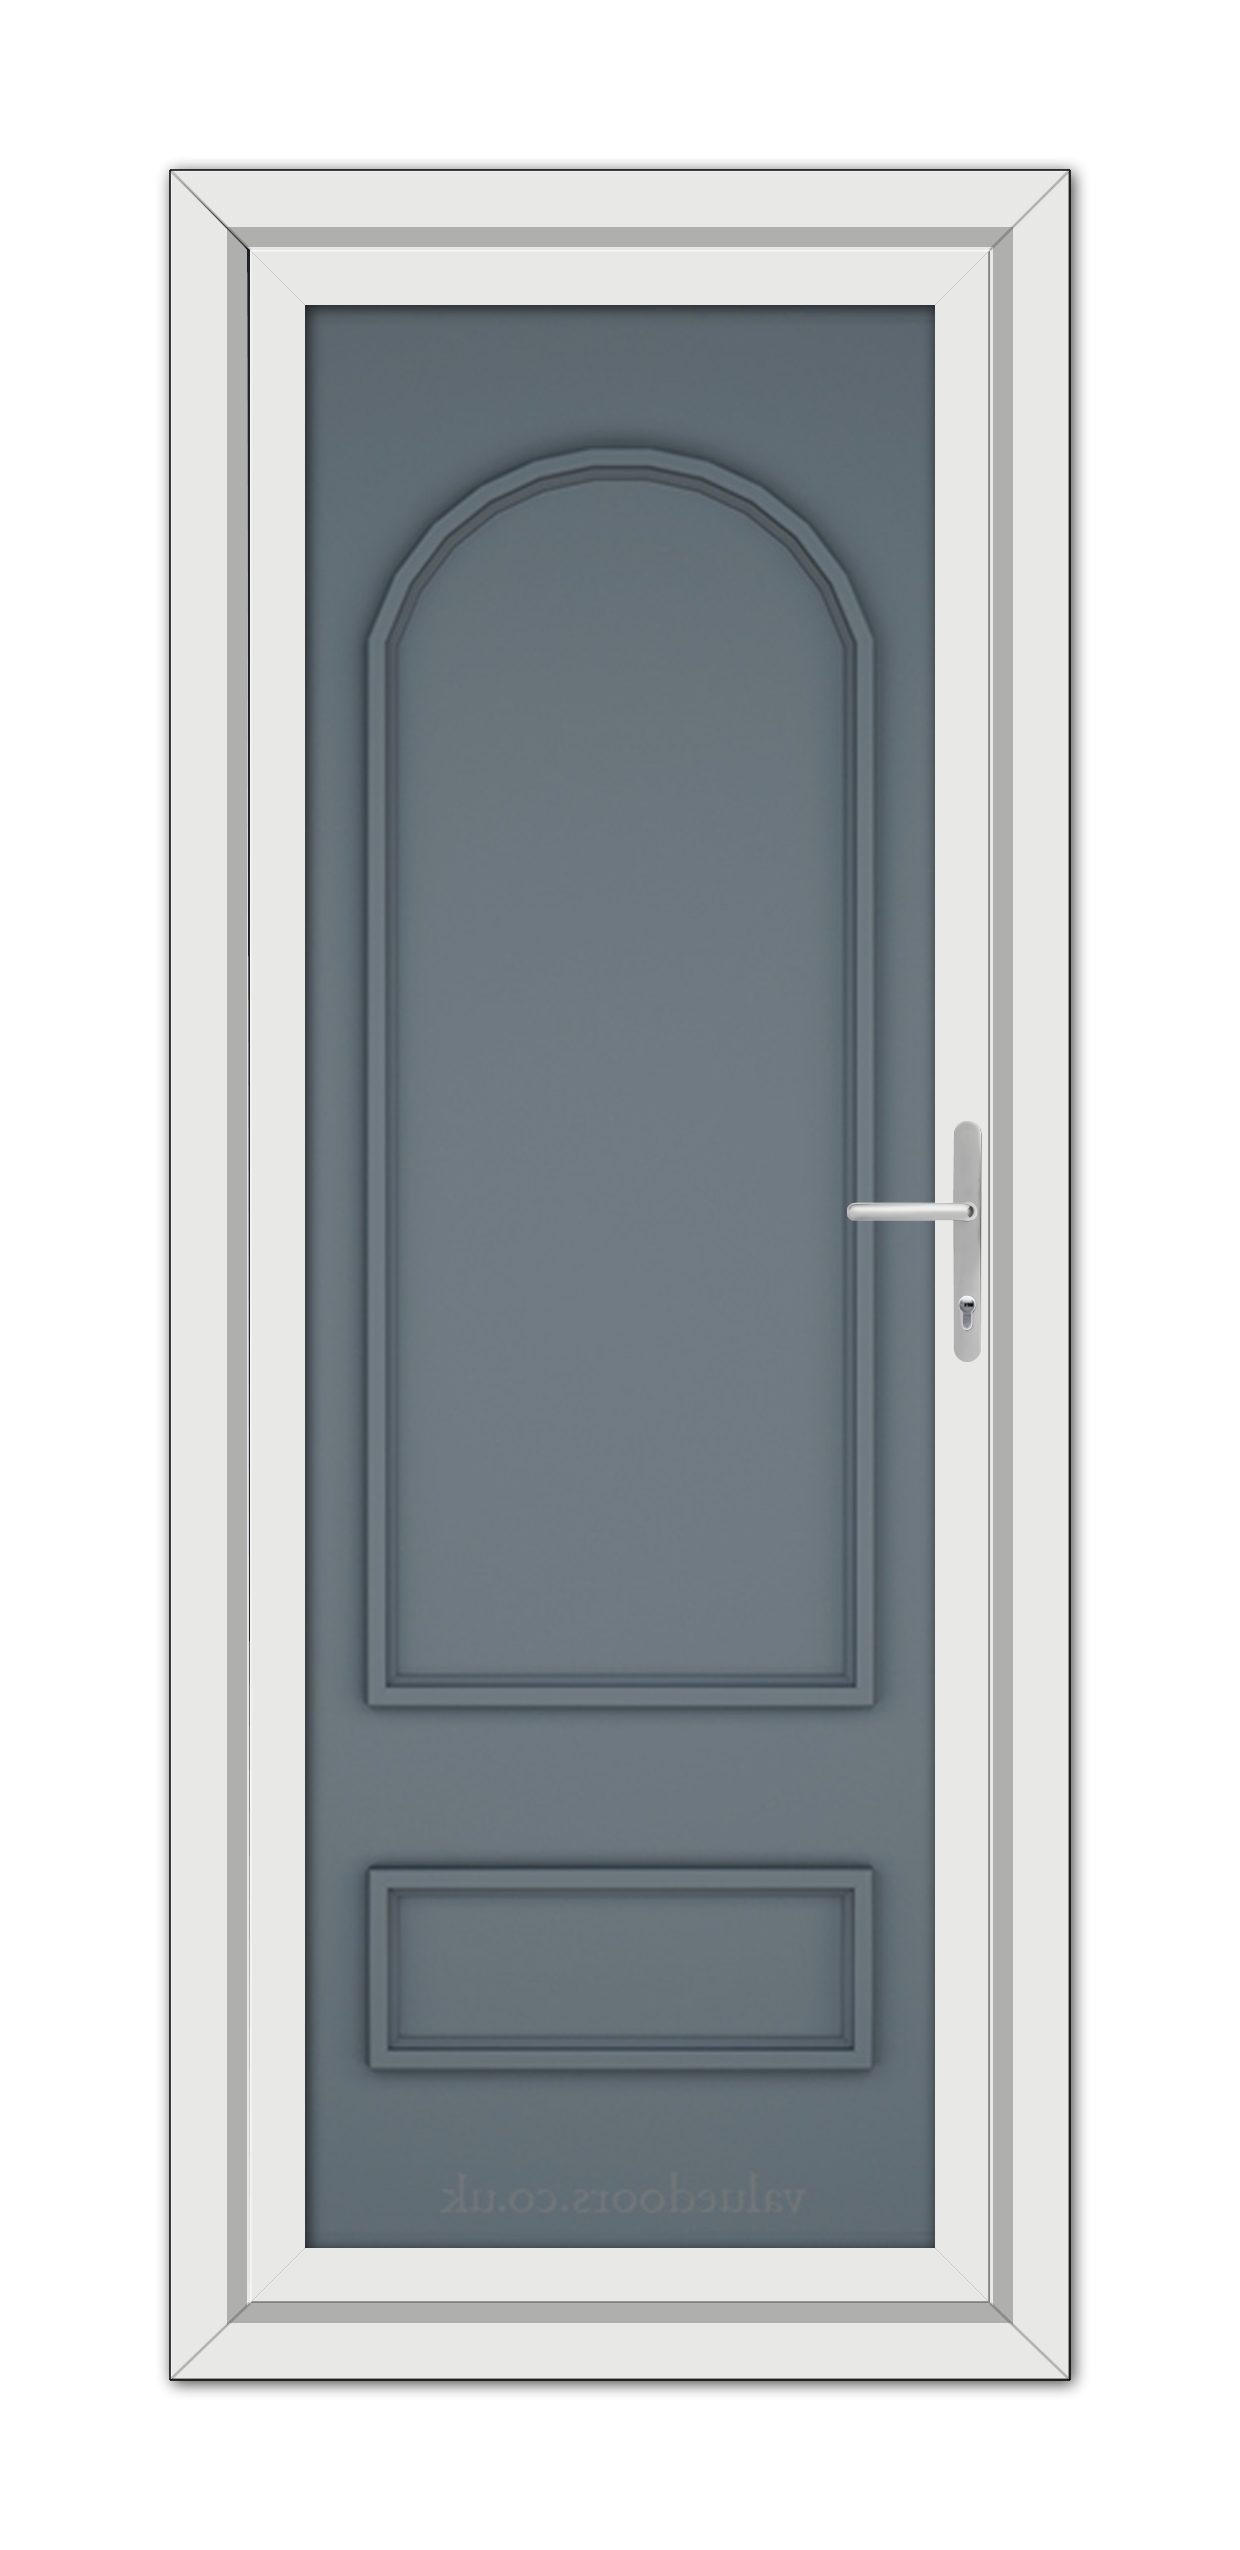 A Slate Grey Canterbury Solid uPVC door with a white frame.